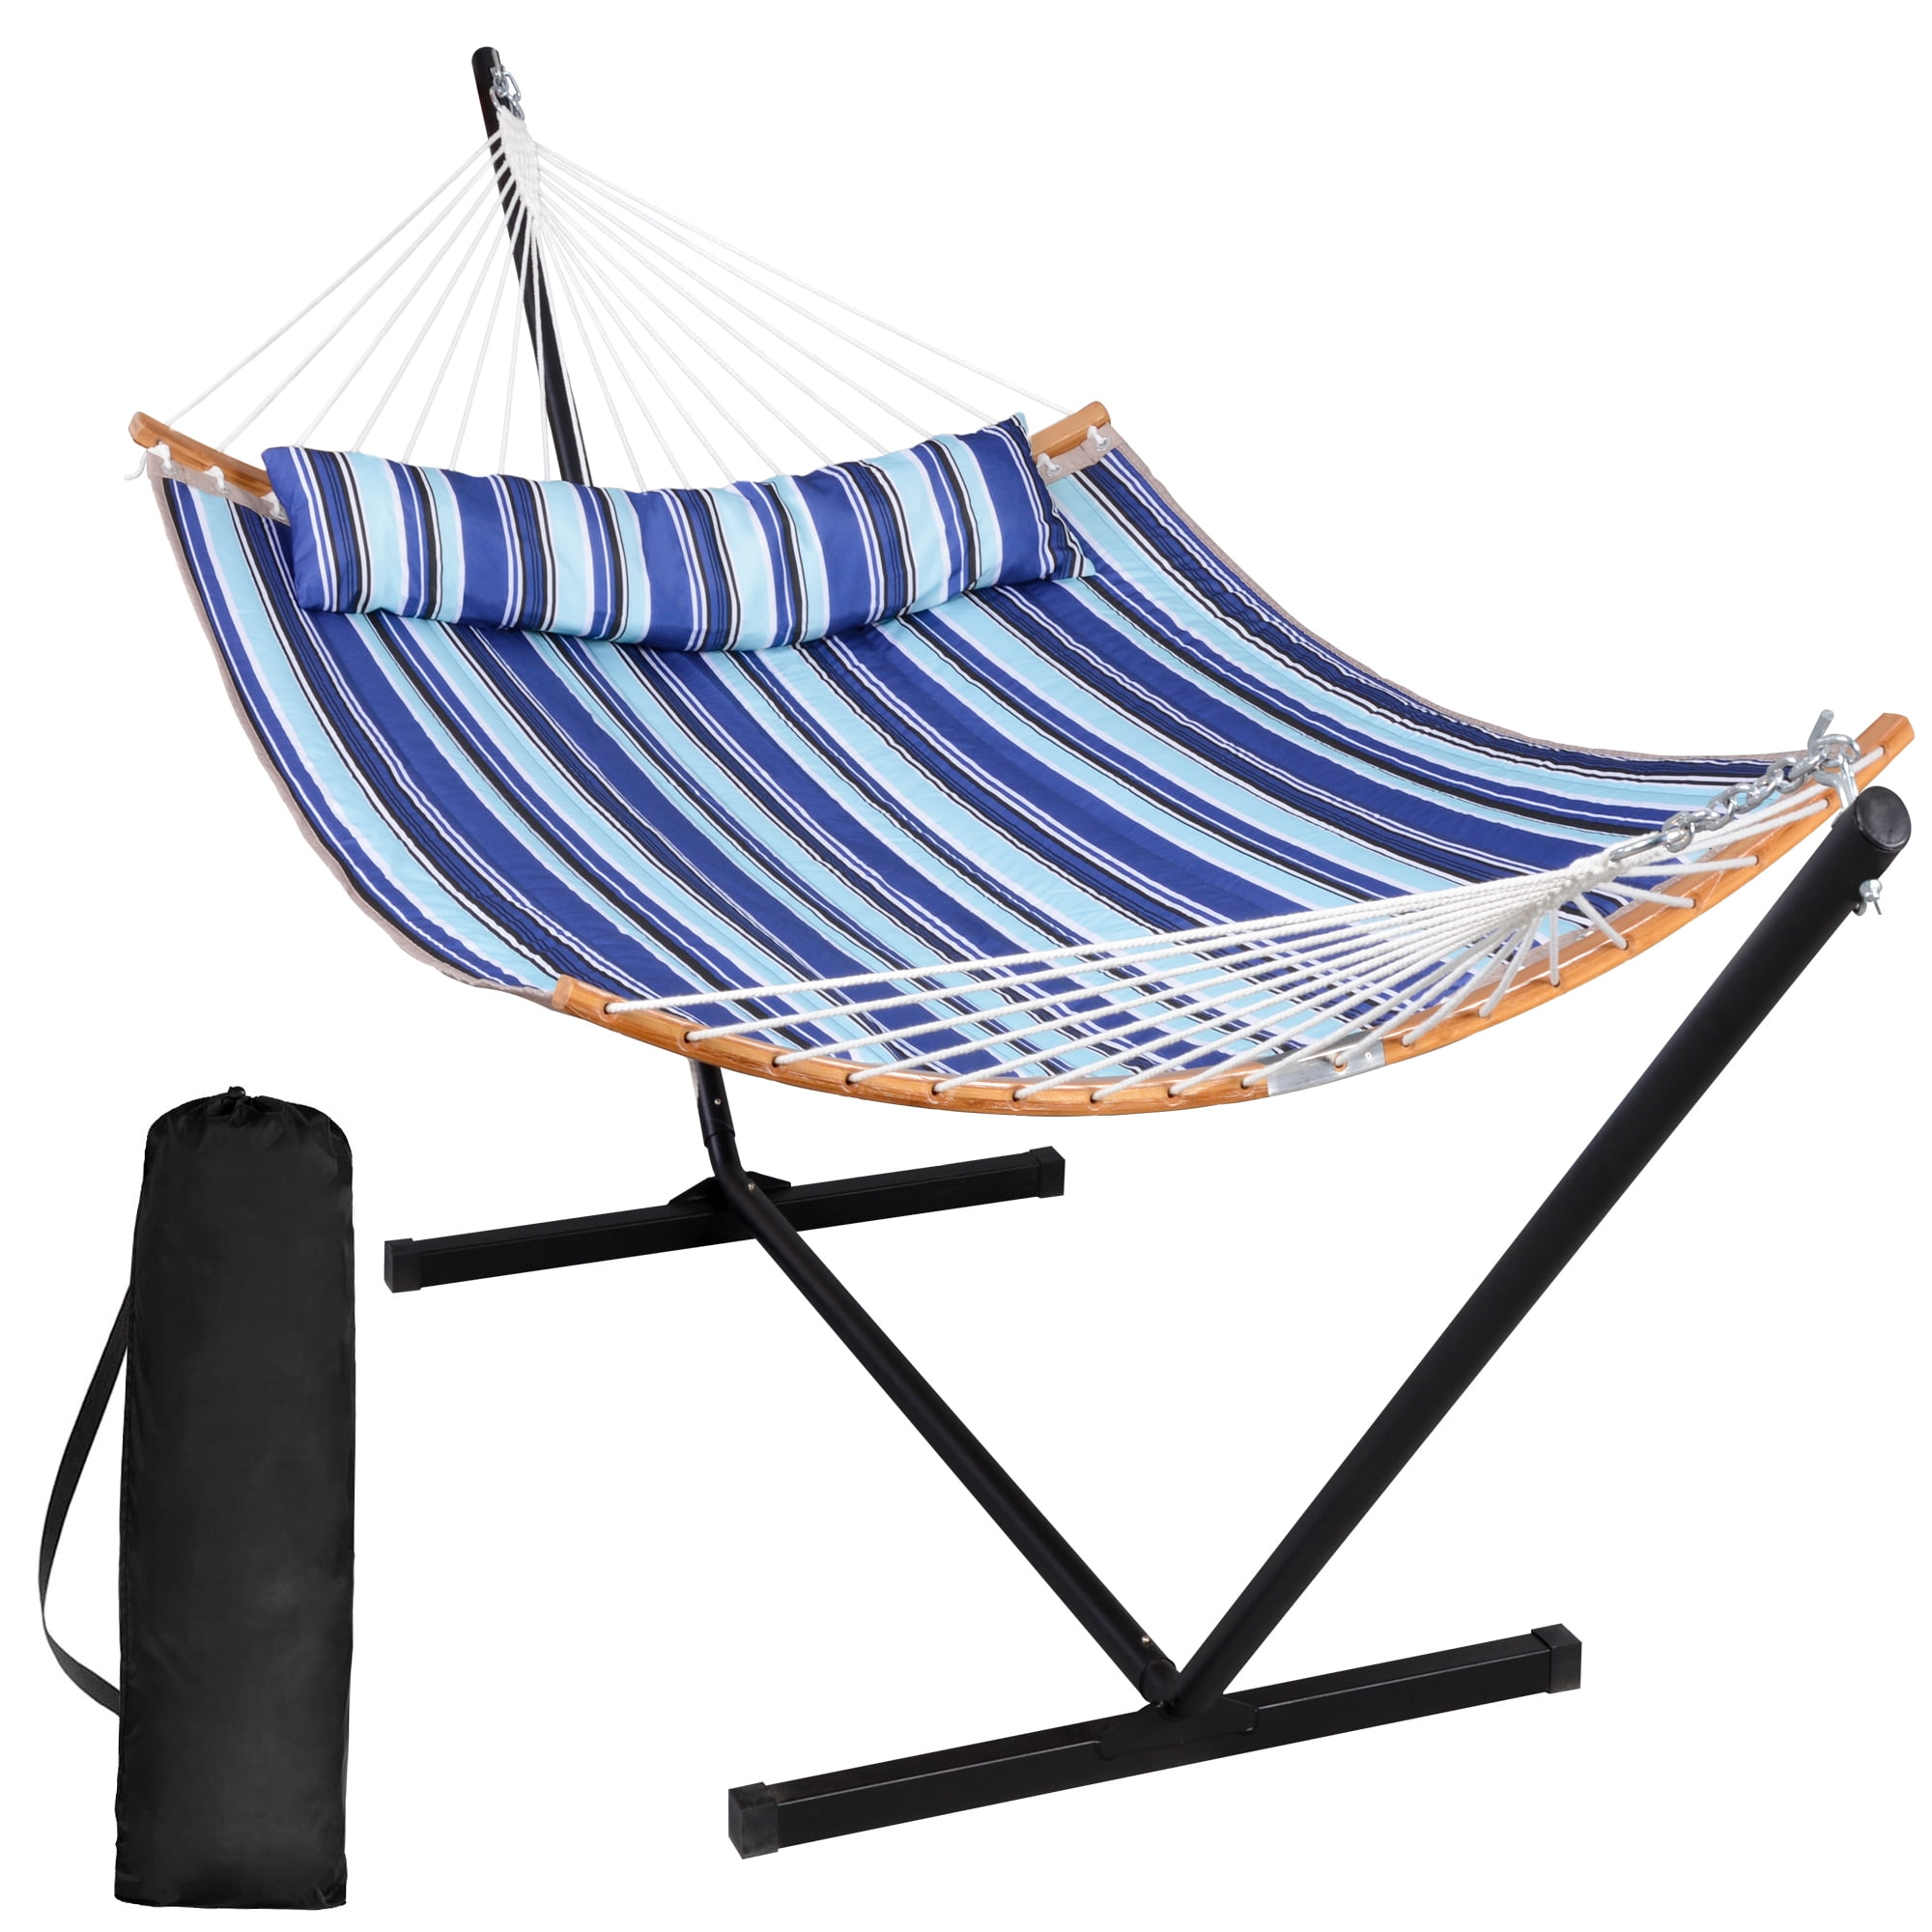 Portable Freestanding Hammock and Stand SUNCREAT Two Person Hammock with Stand Light Blue Waves Extra Large Pillow Hardwood Spreader Bar 